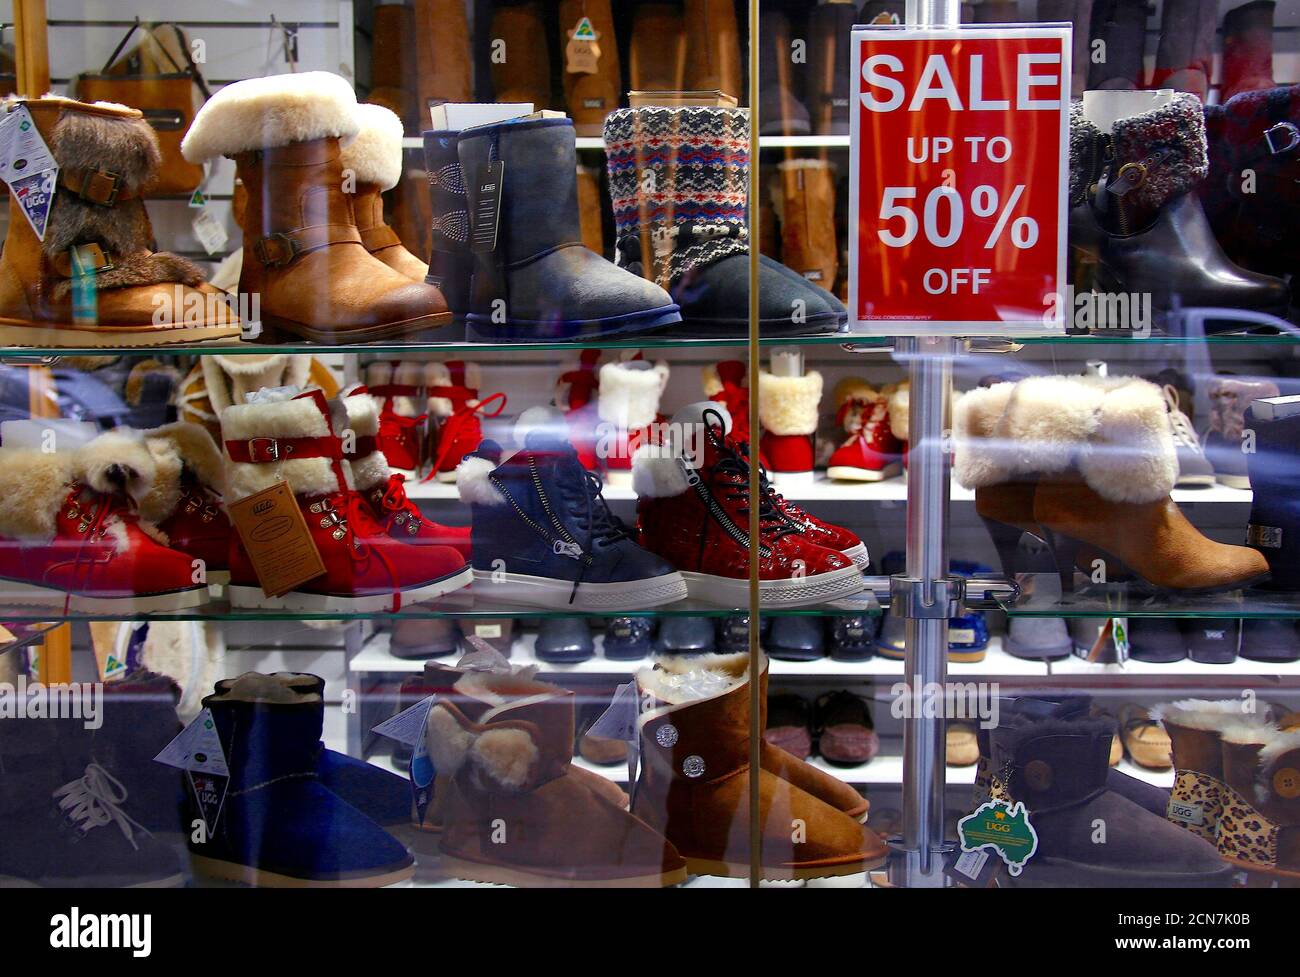 ugg direct factory outlet